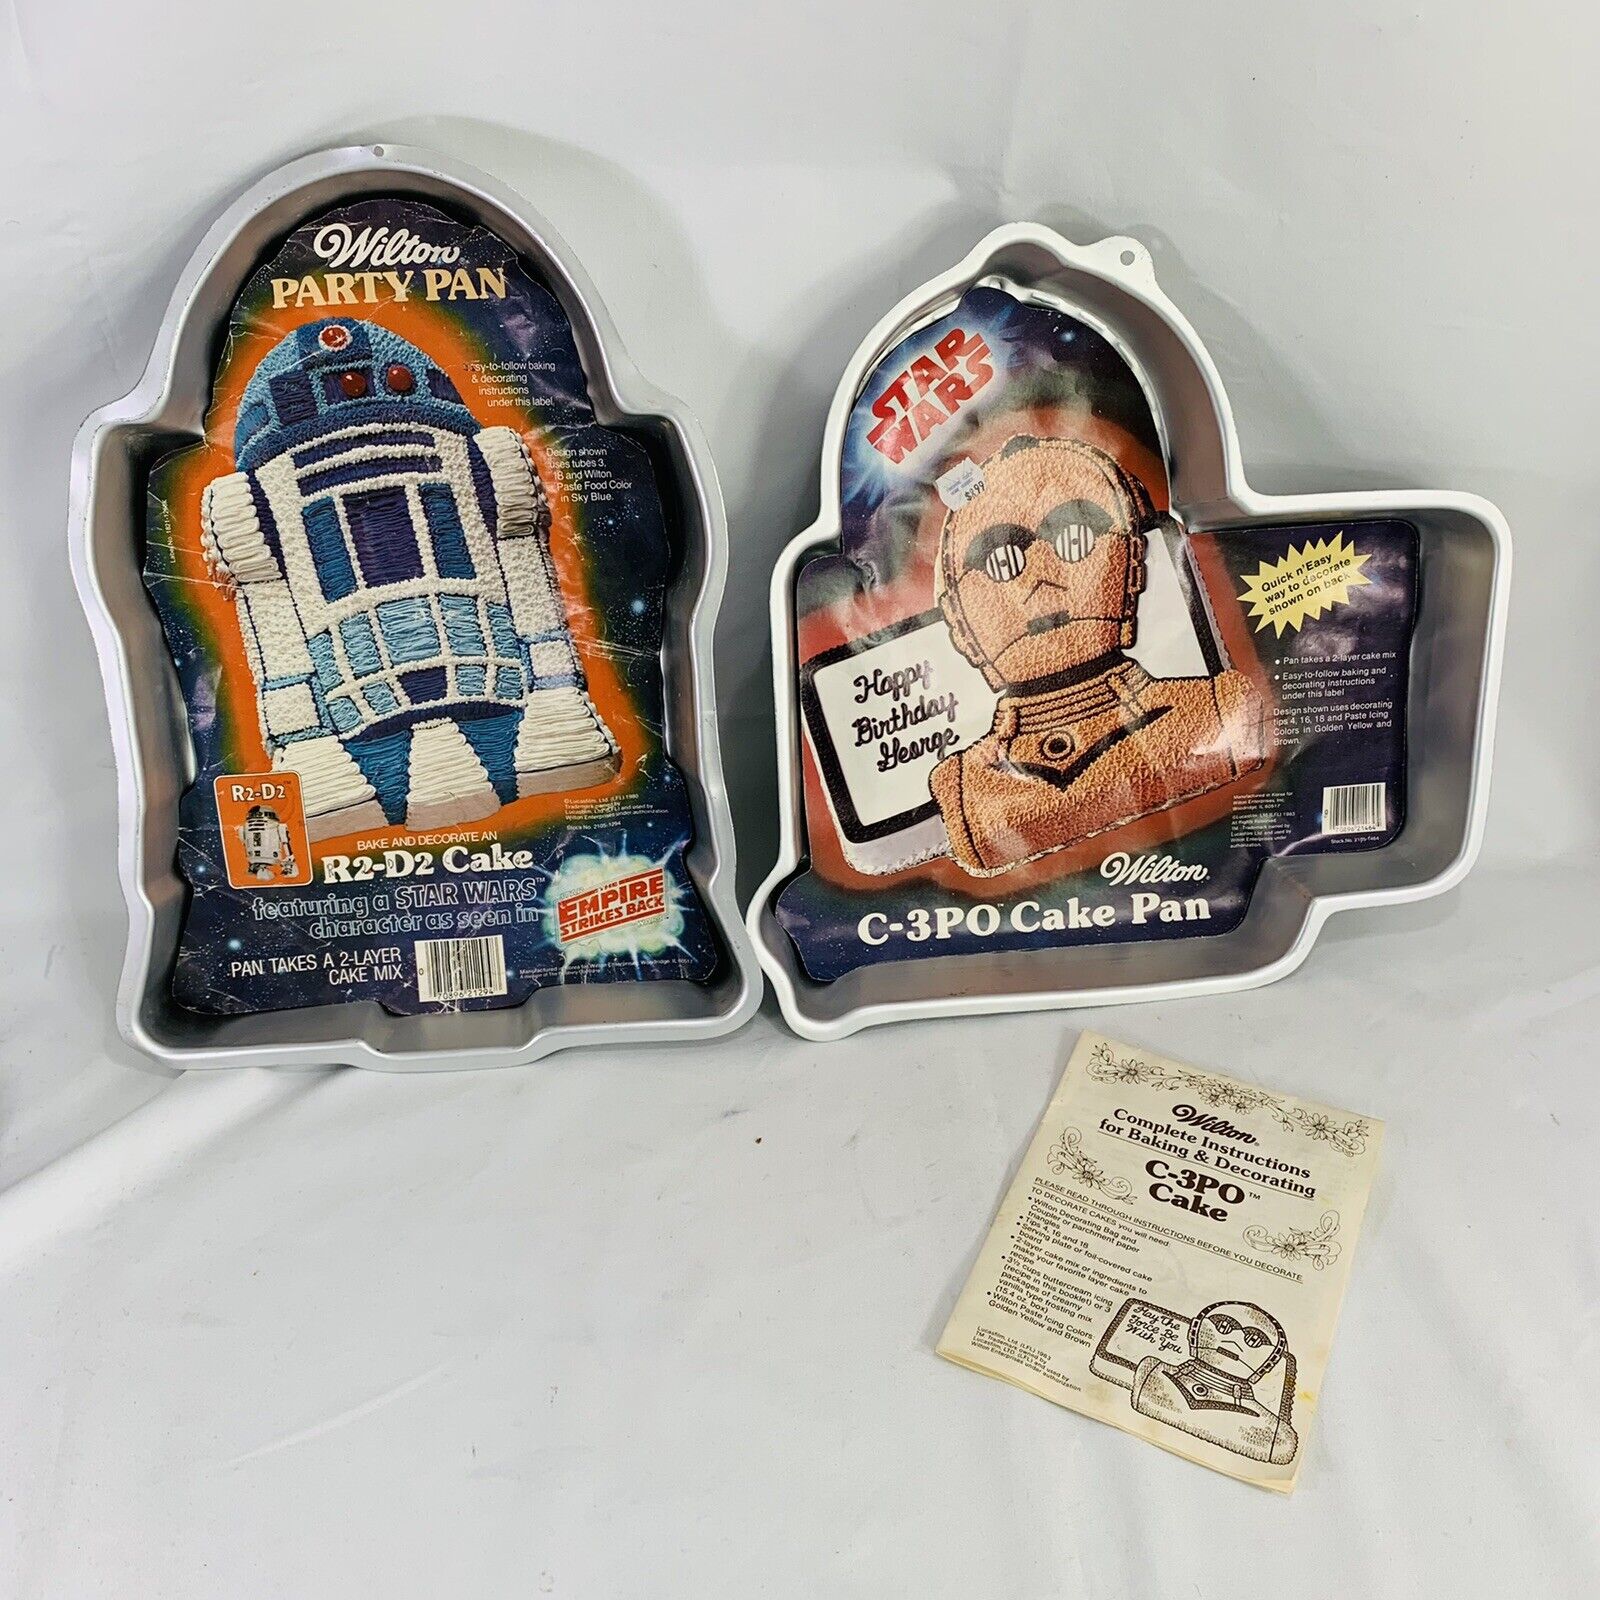 Vintage Wilton Cake Pan 1980's R2d2 Cp3o With Insert Booklet For C3po Star Wars